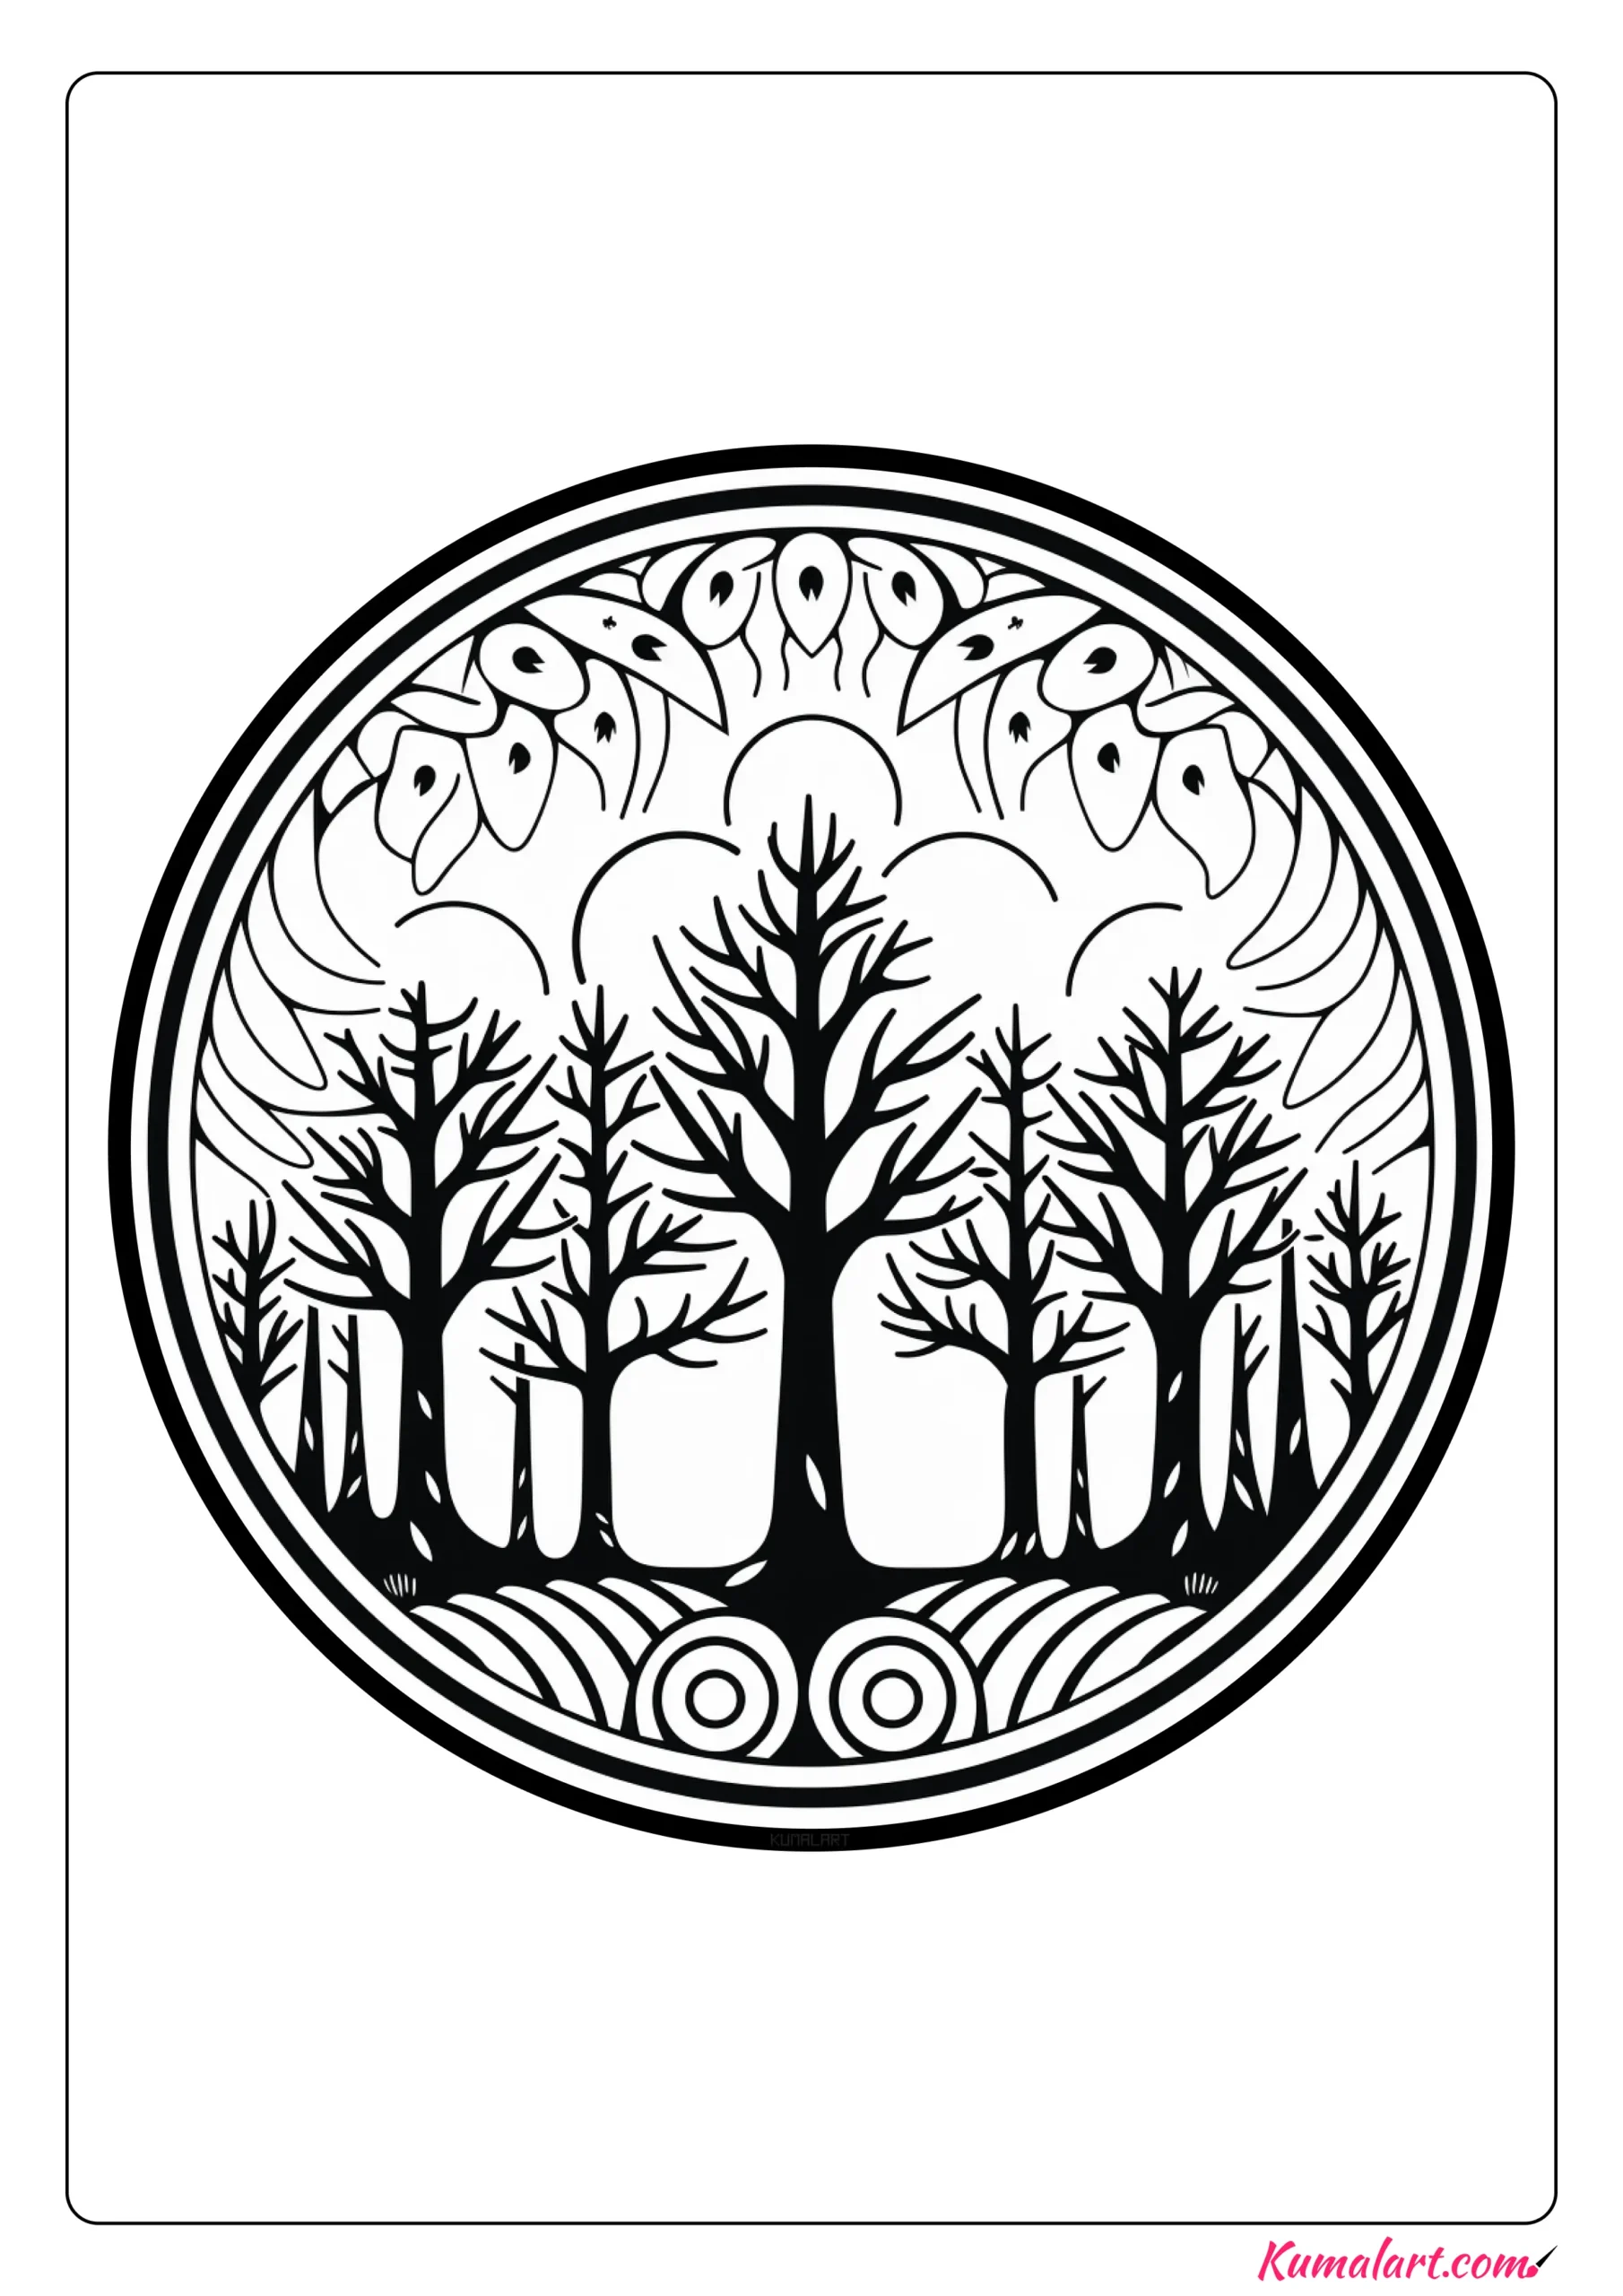 Lush Forest Coloring Page